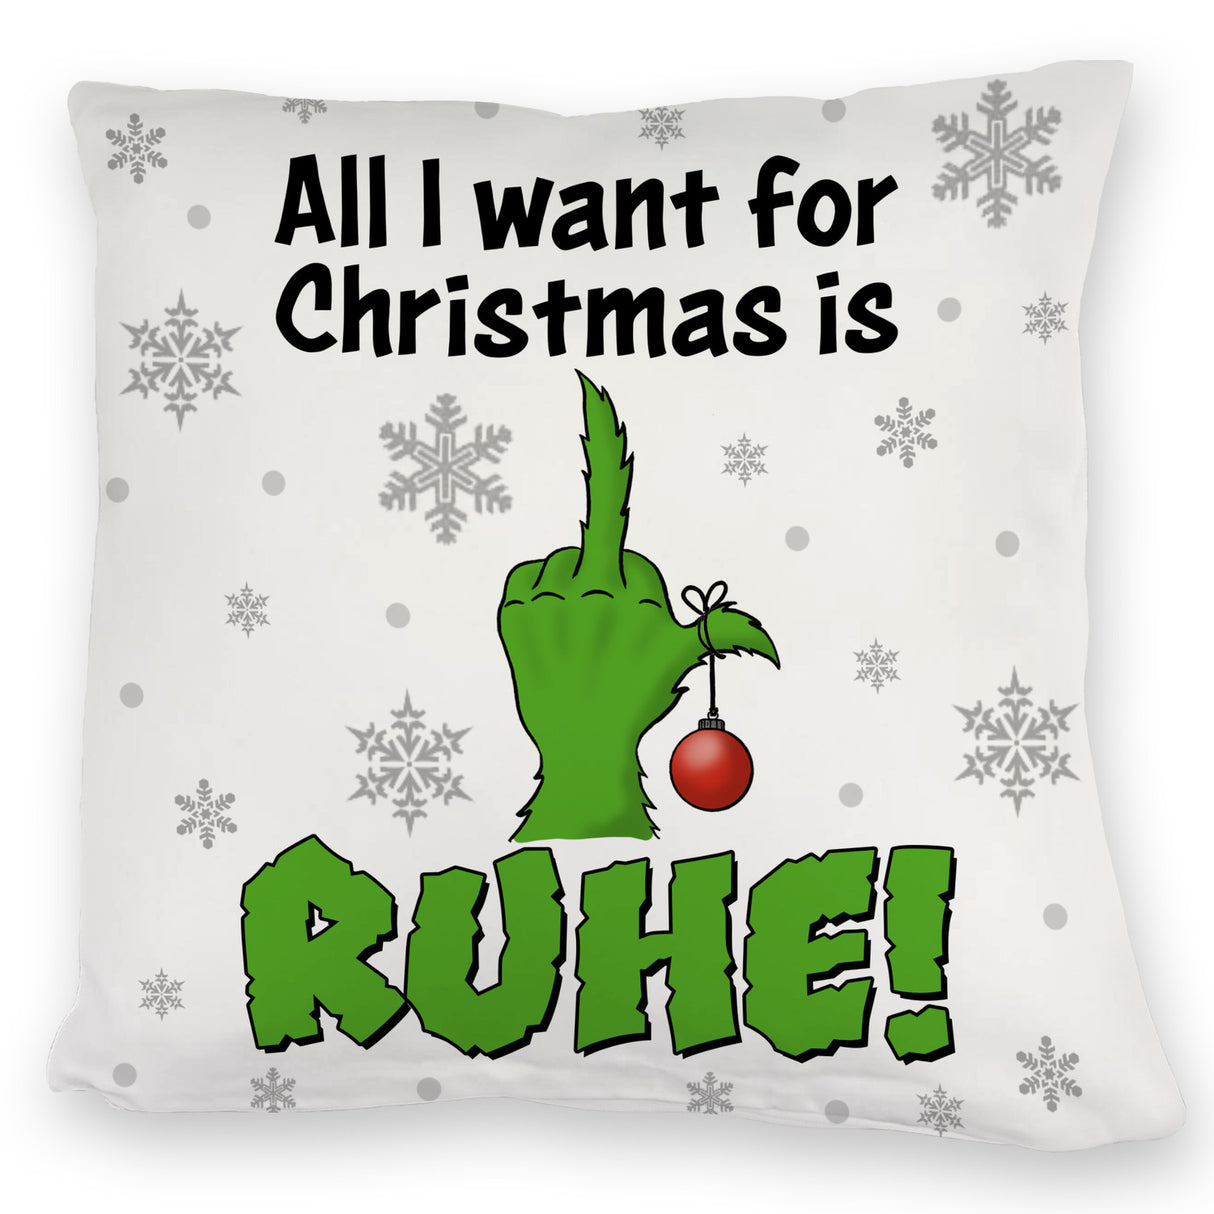 Weihnachtsmuffel Kissen mit Spruch All I want for Christmas is Ruhe